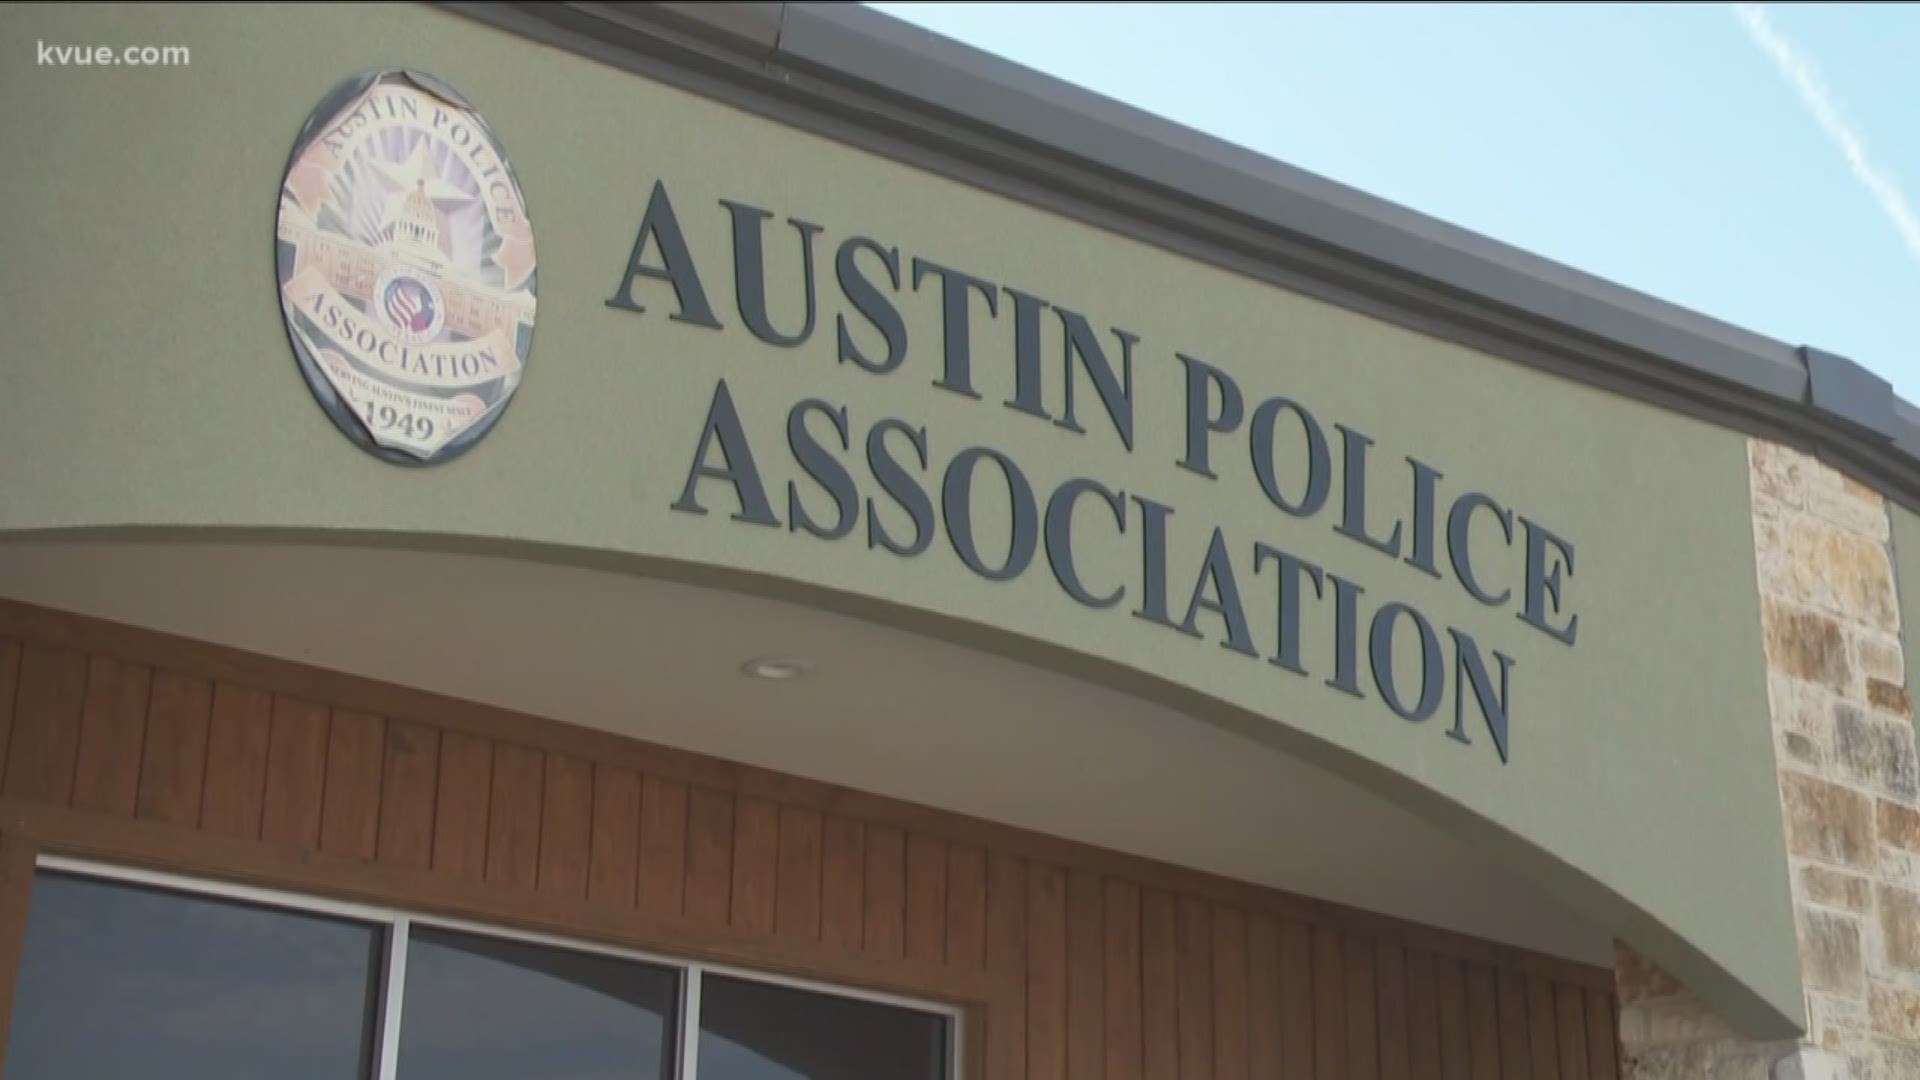 The Austin Police Association is demanding a "fair investigation" into Chief Brian Manley and other ranking officers.